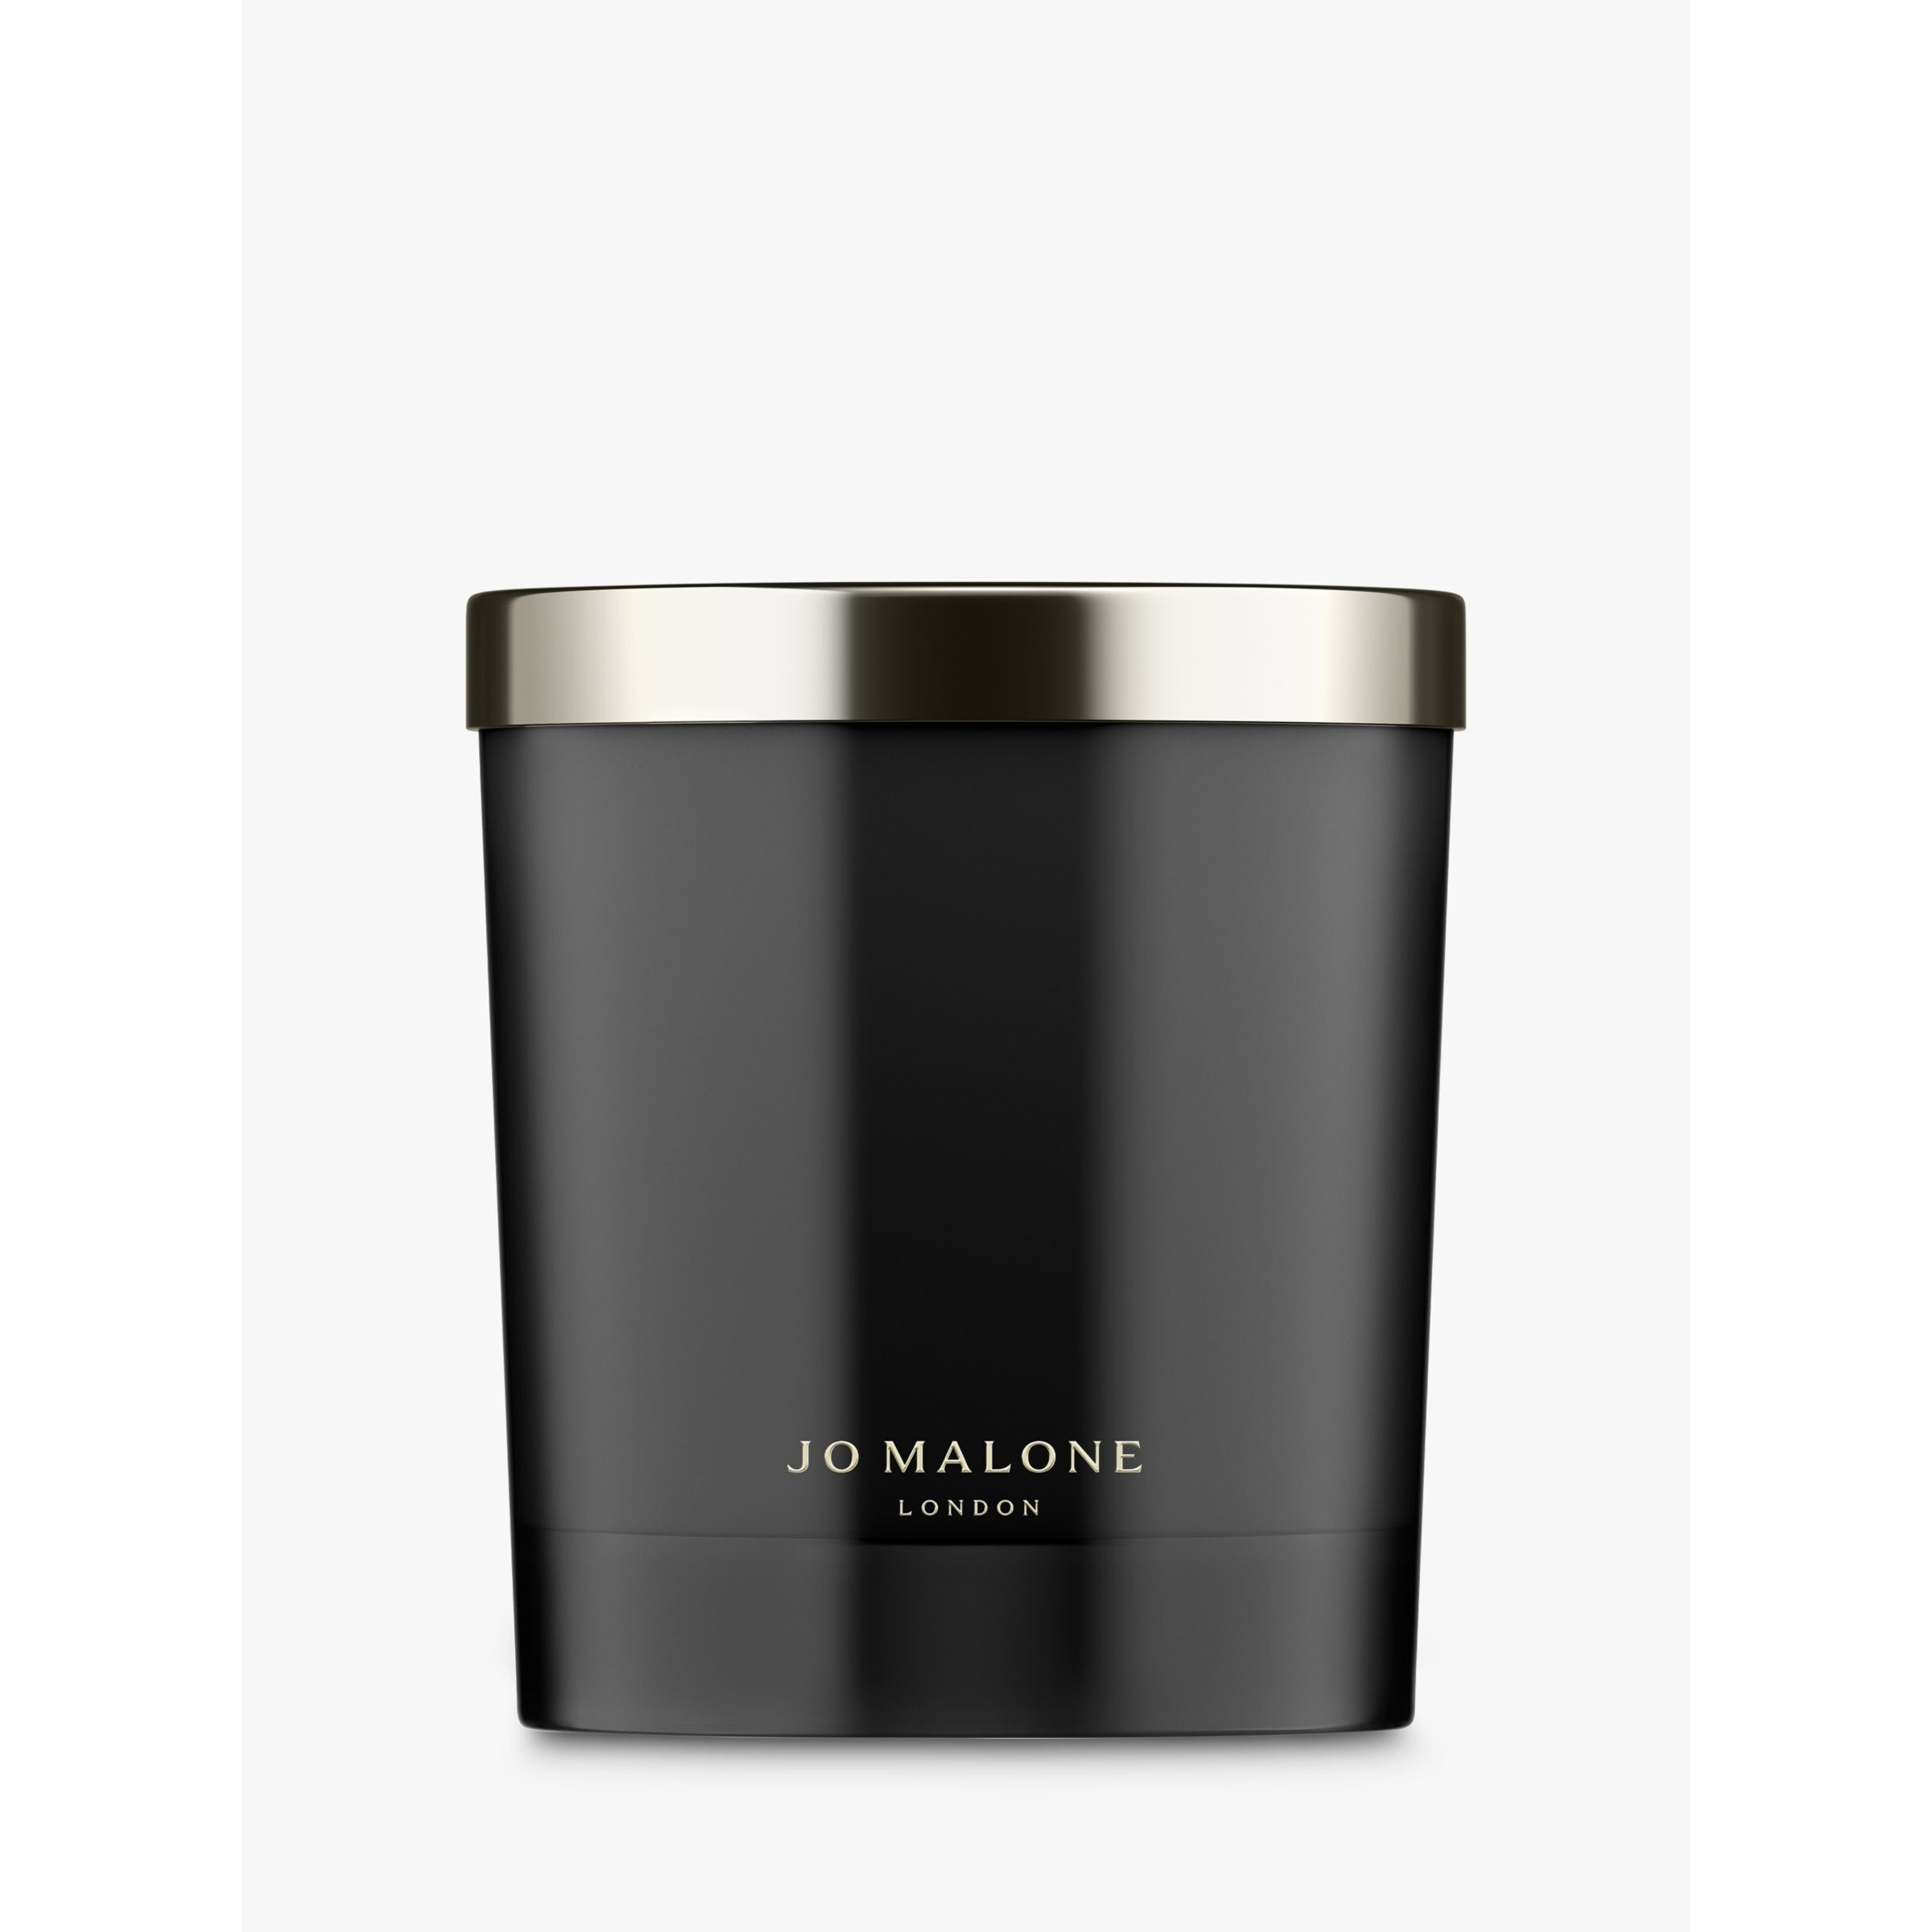 Jo Malone London Dark Amber & Ginger Lily Home Scented Candle, 200g - image 1